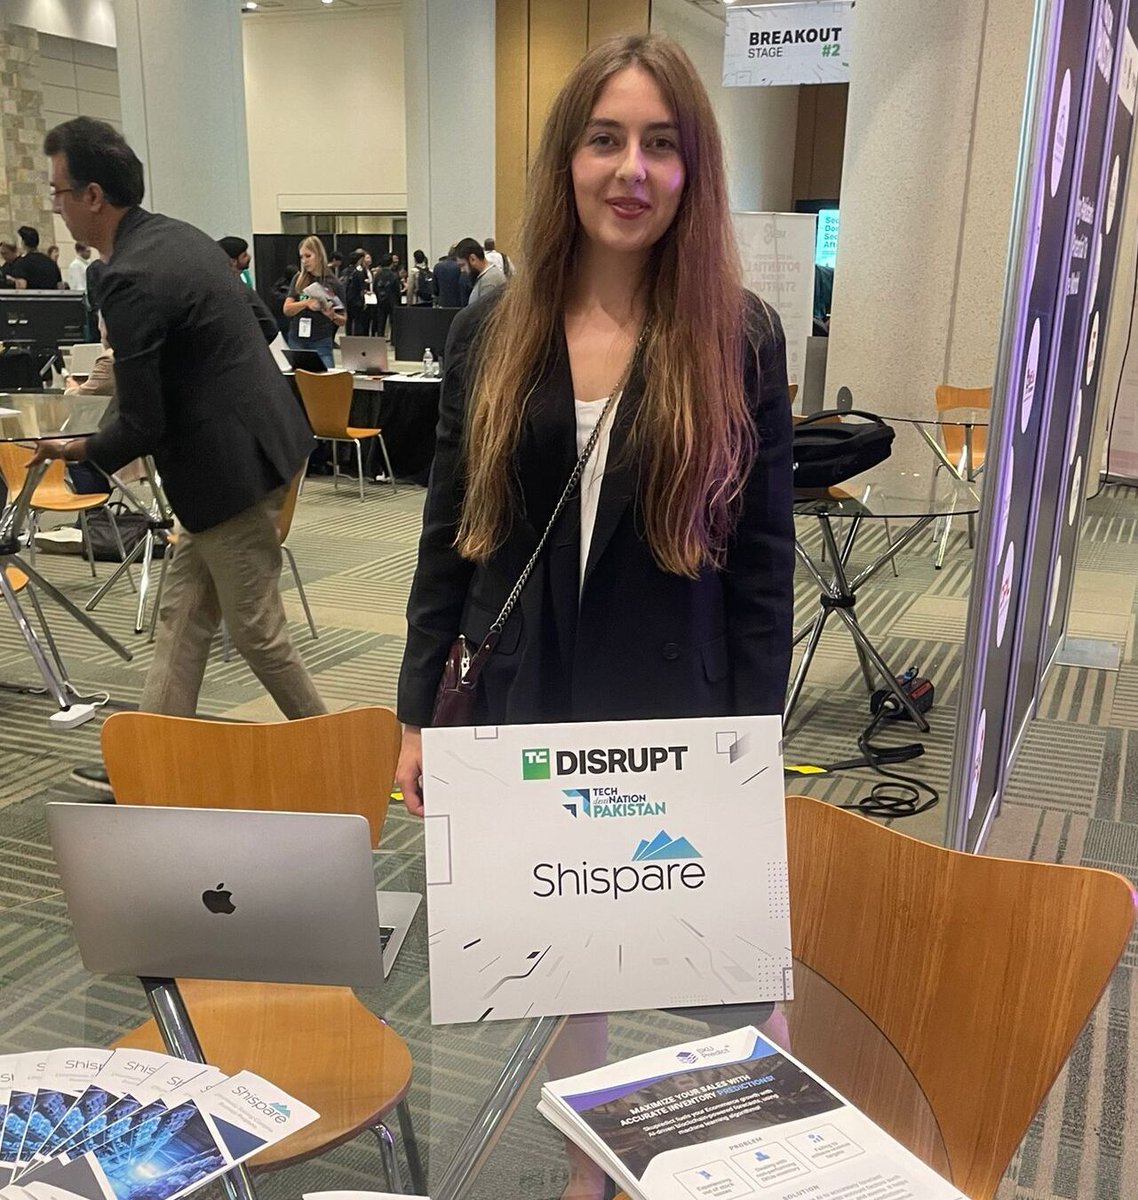 Day 1 of the TechCrunch event is off to a great start! Our representative is exploring networking 🤝 opportunities and gaining the latest knowledge about the industry.
Come see us at 𝗕𝗼𝗼𝘁𝗵#𝗛𝟭𝟳 on Day 2.

#TechCrunch #Disrupt2023  #techcrunchdisrupt #techcrunchdisrupt2023